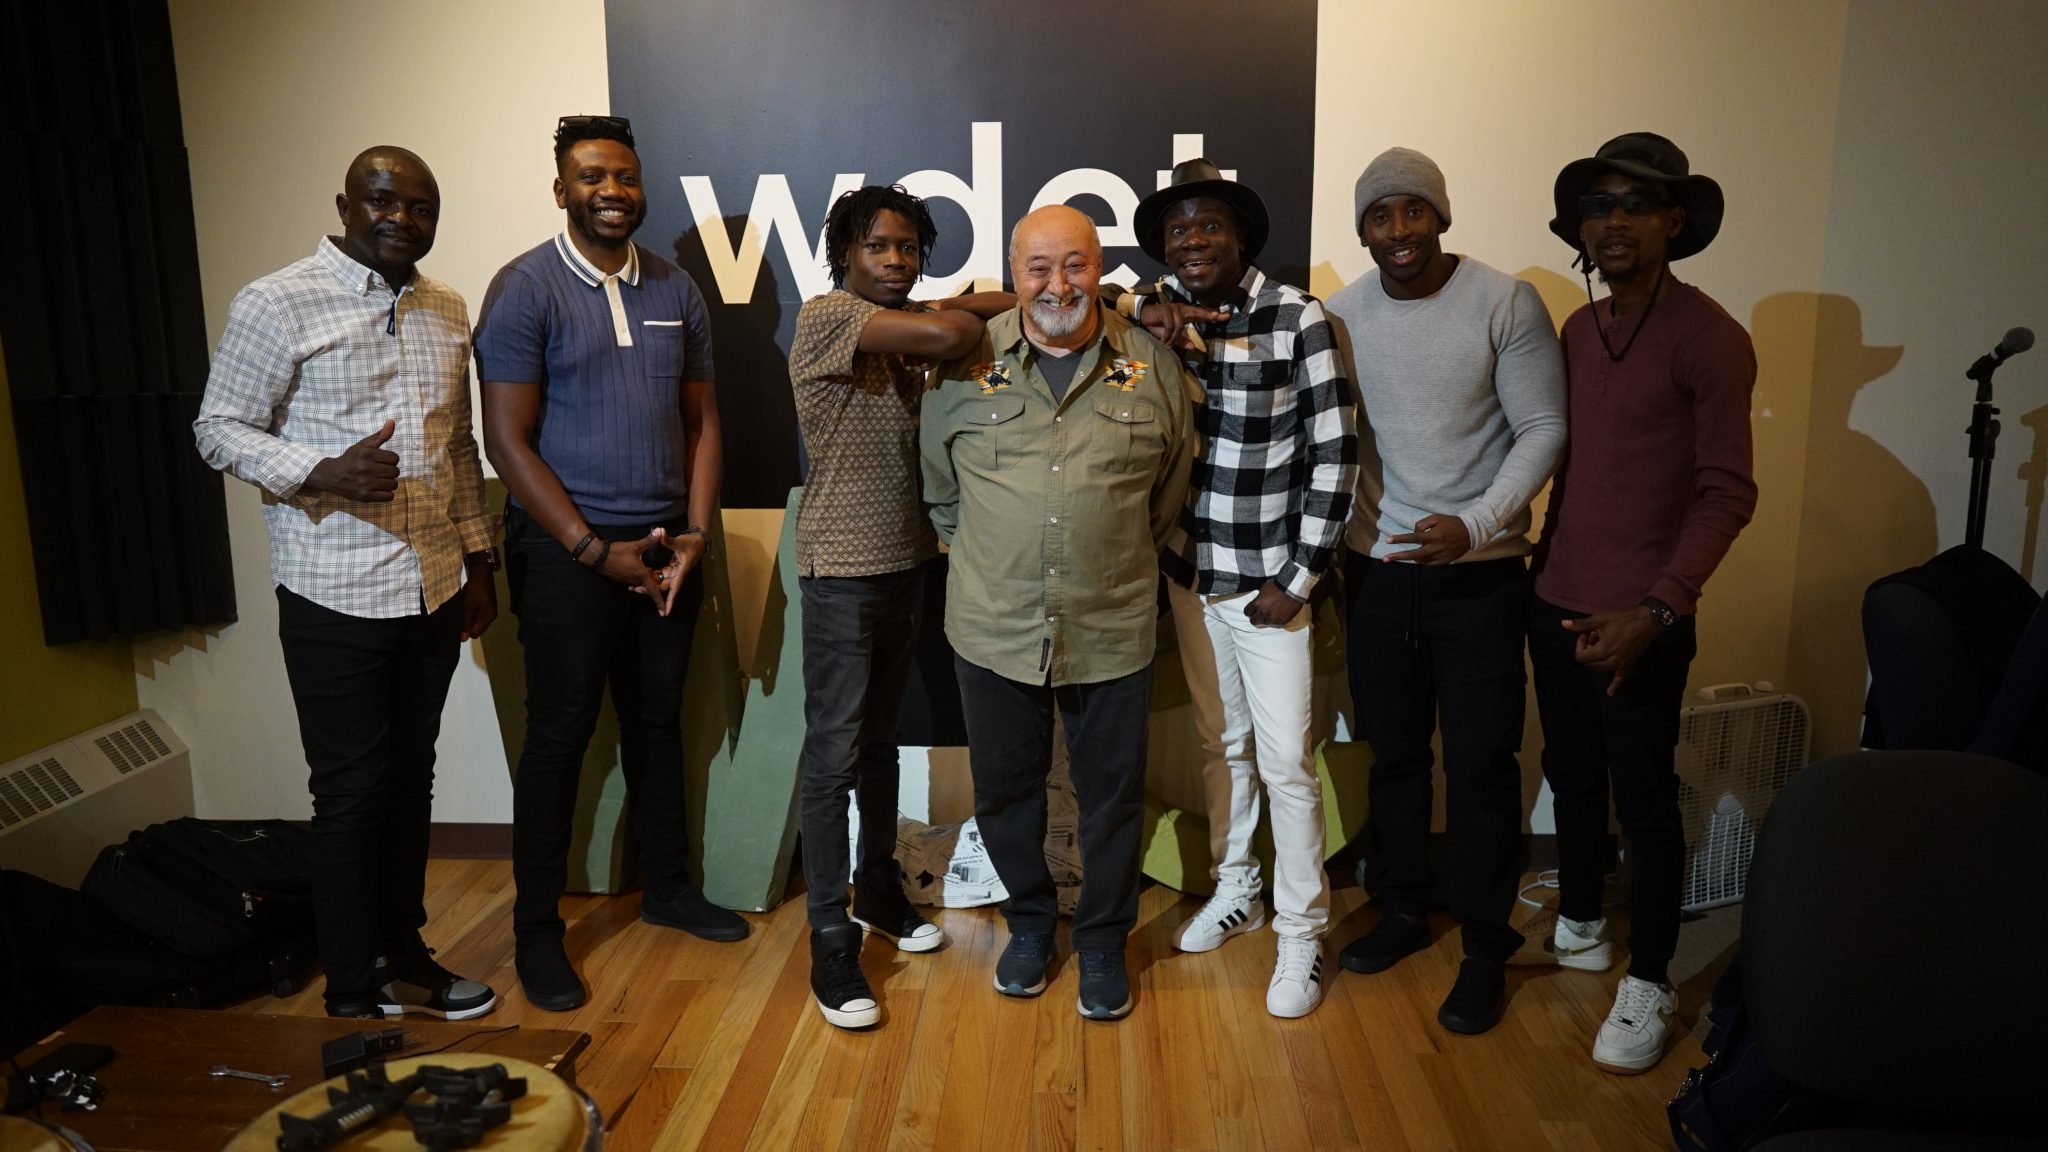 WDET "This Island Earth" host Ismael Ahmed posing with members of Mokoomba inside the WDET studios.